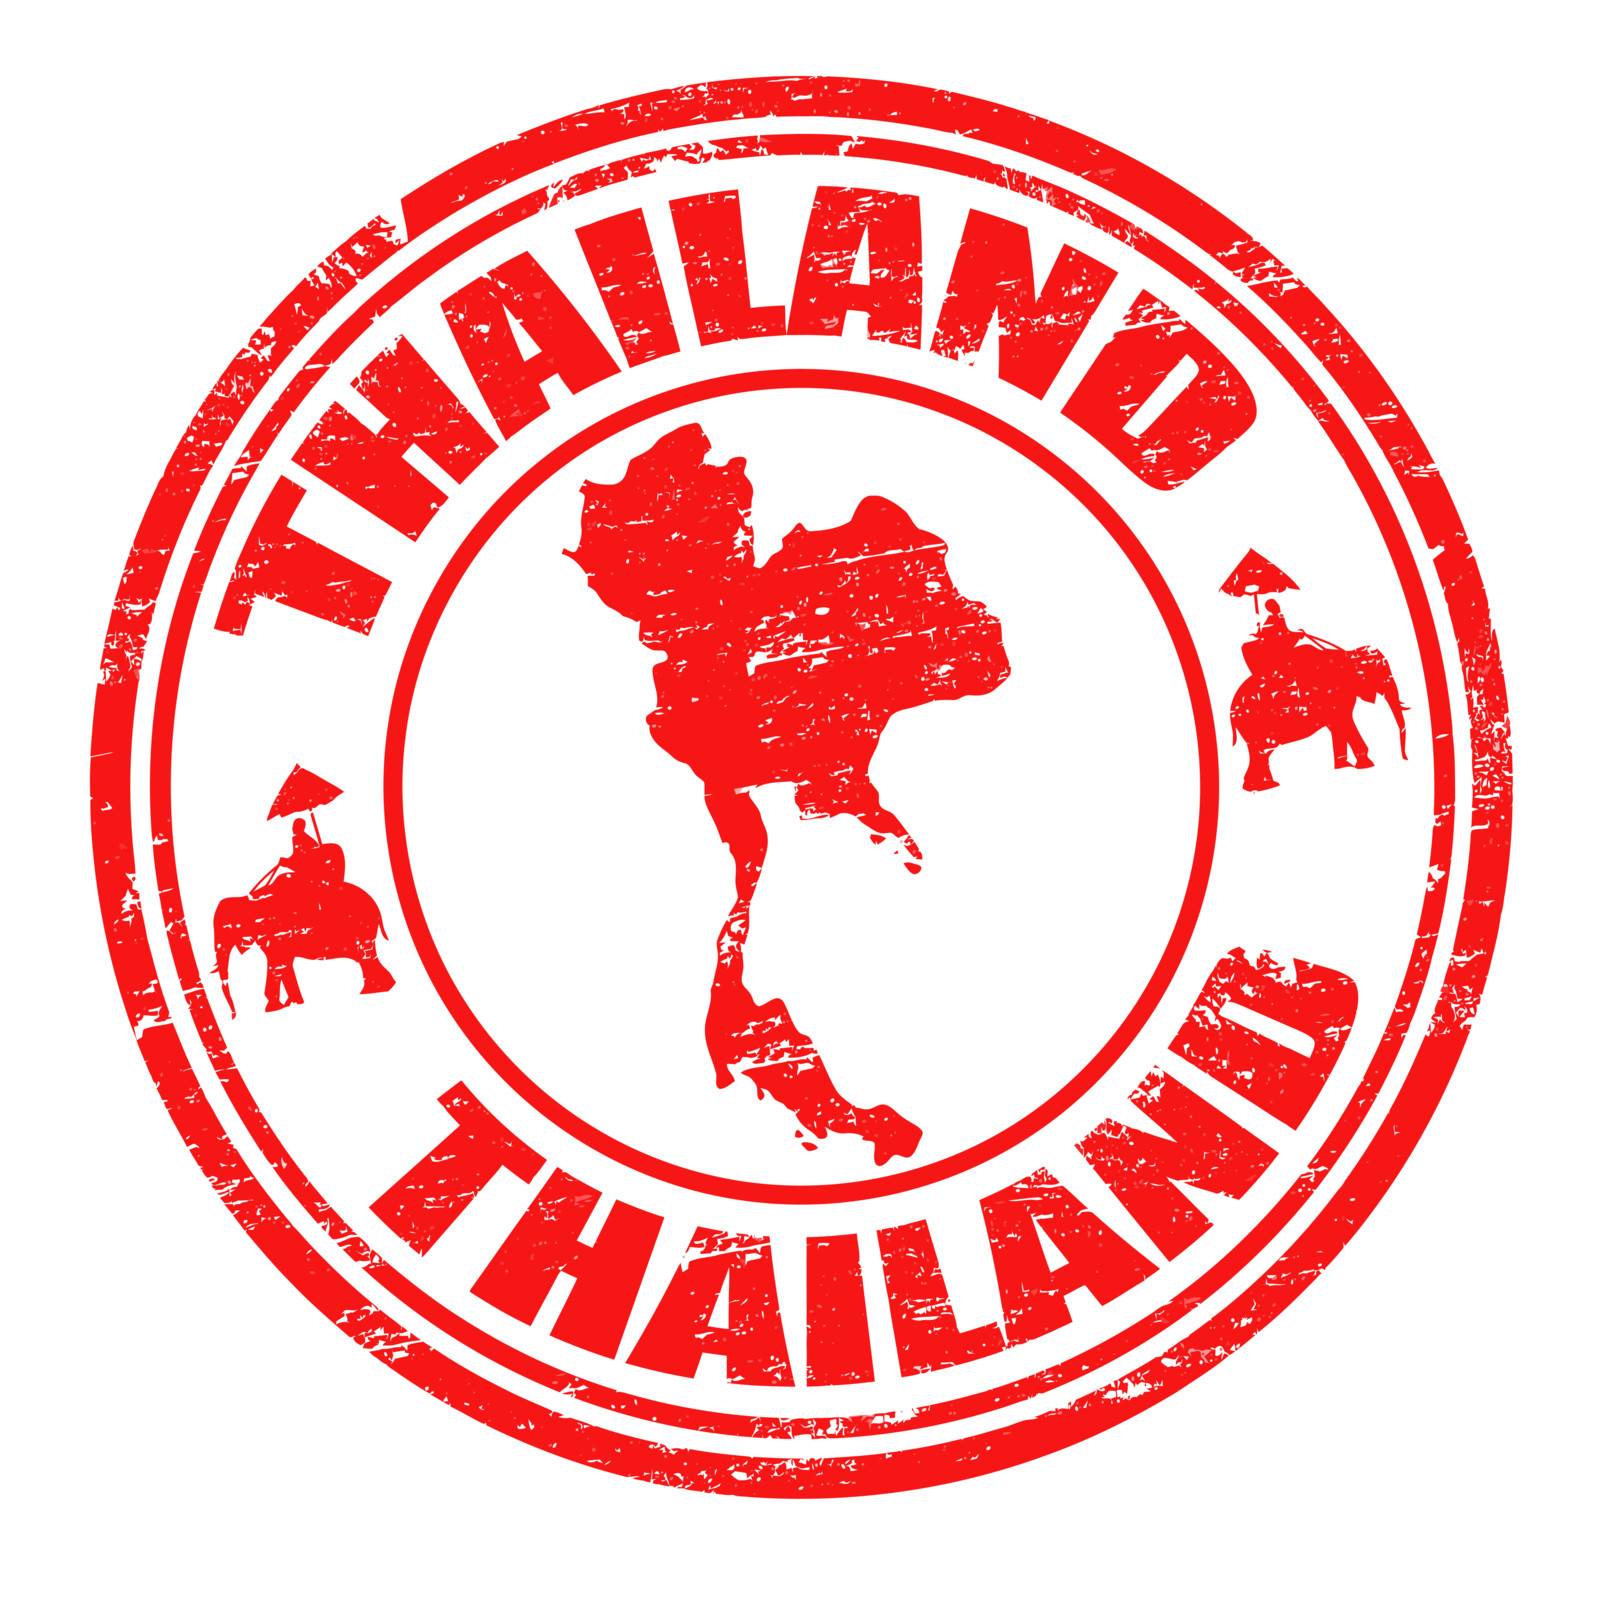 Thailand stamp by roxanabalint